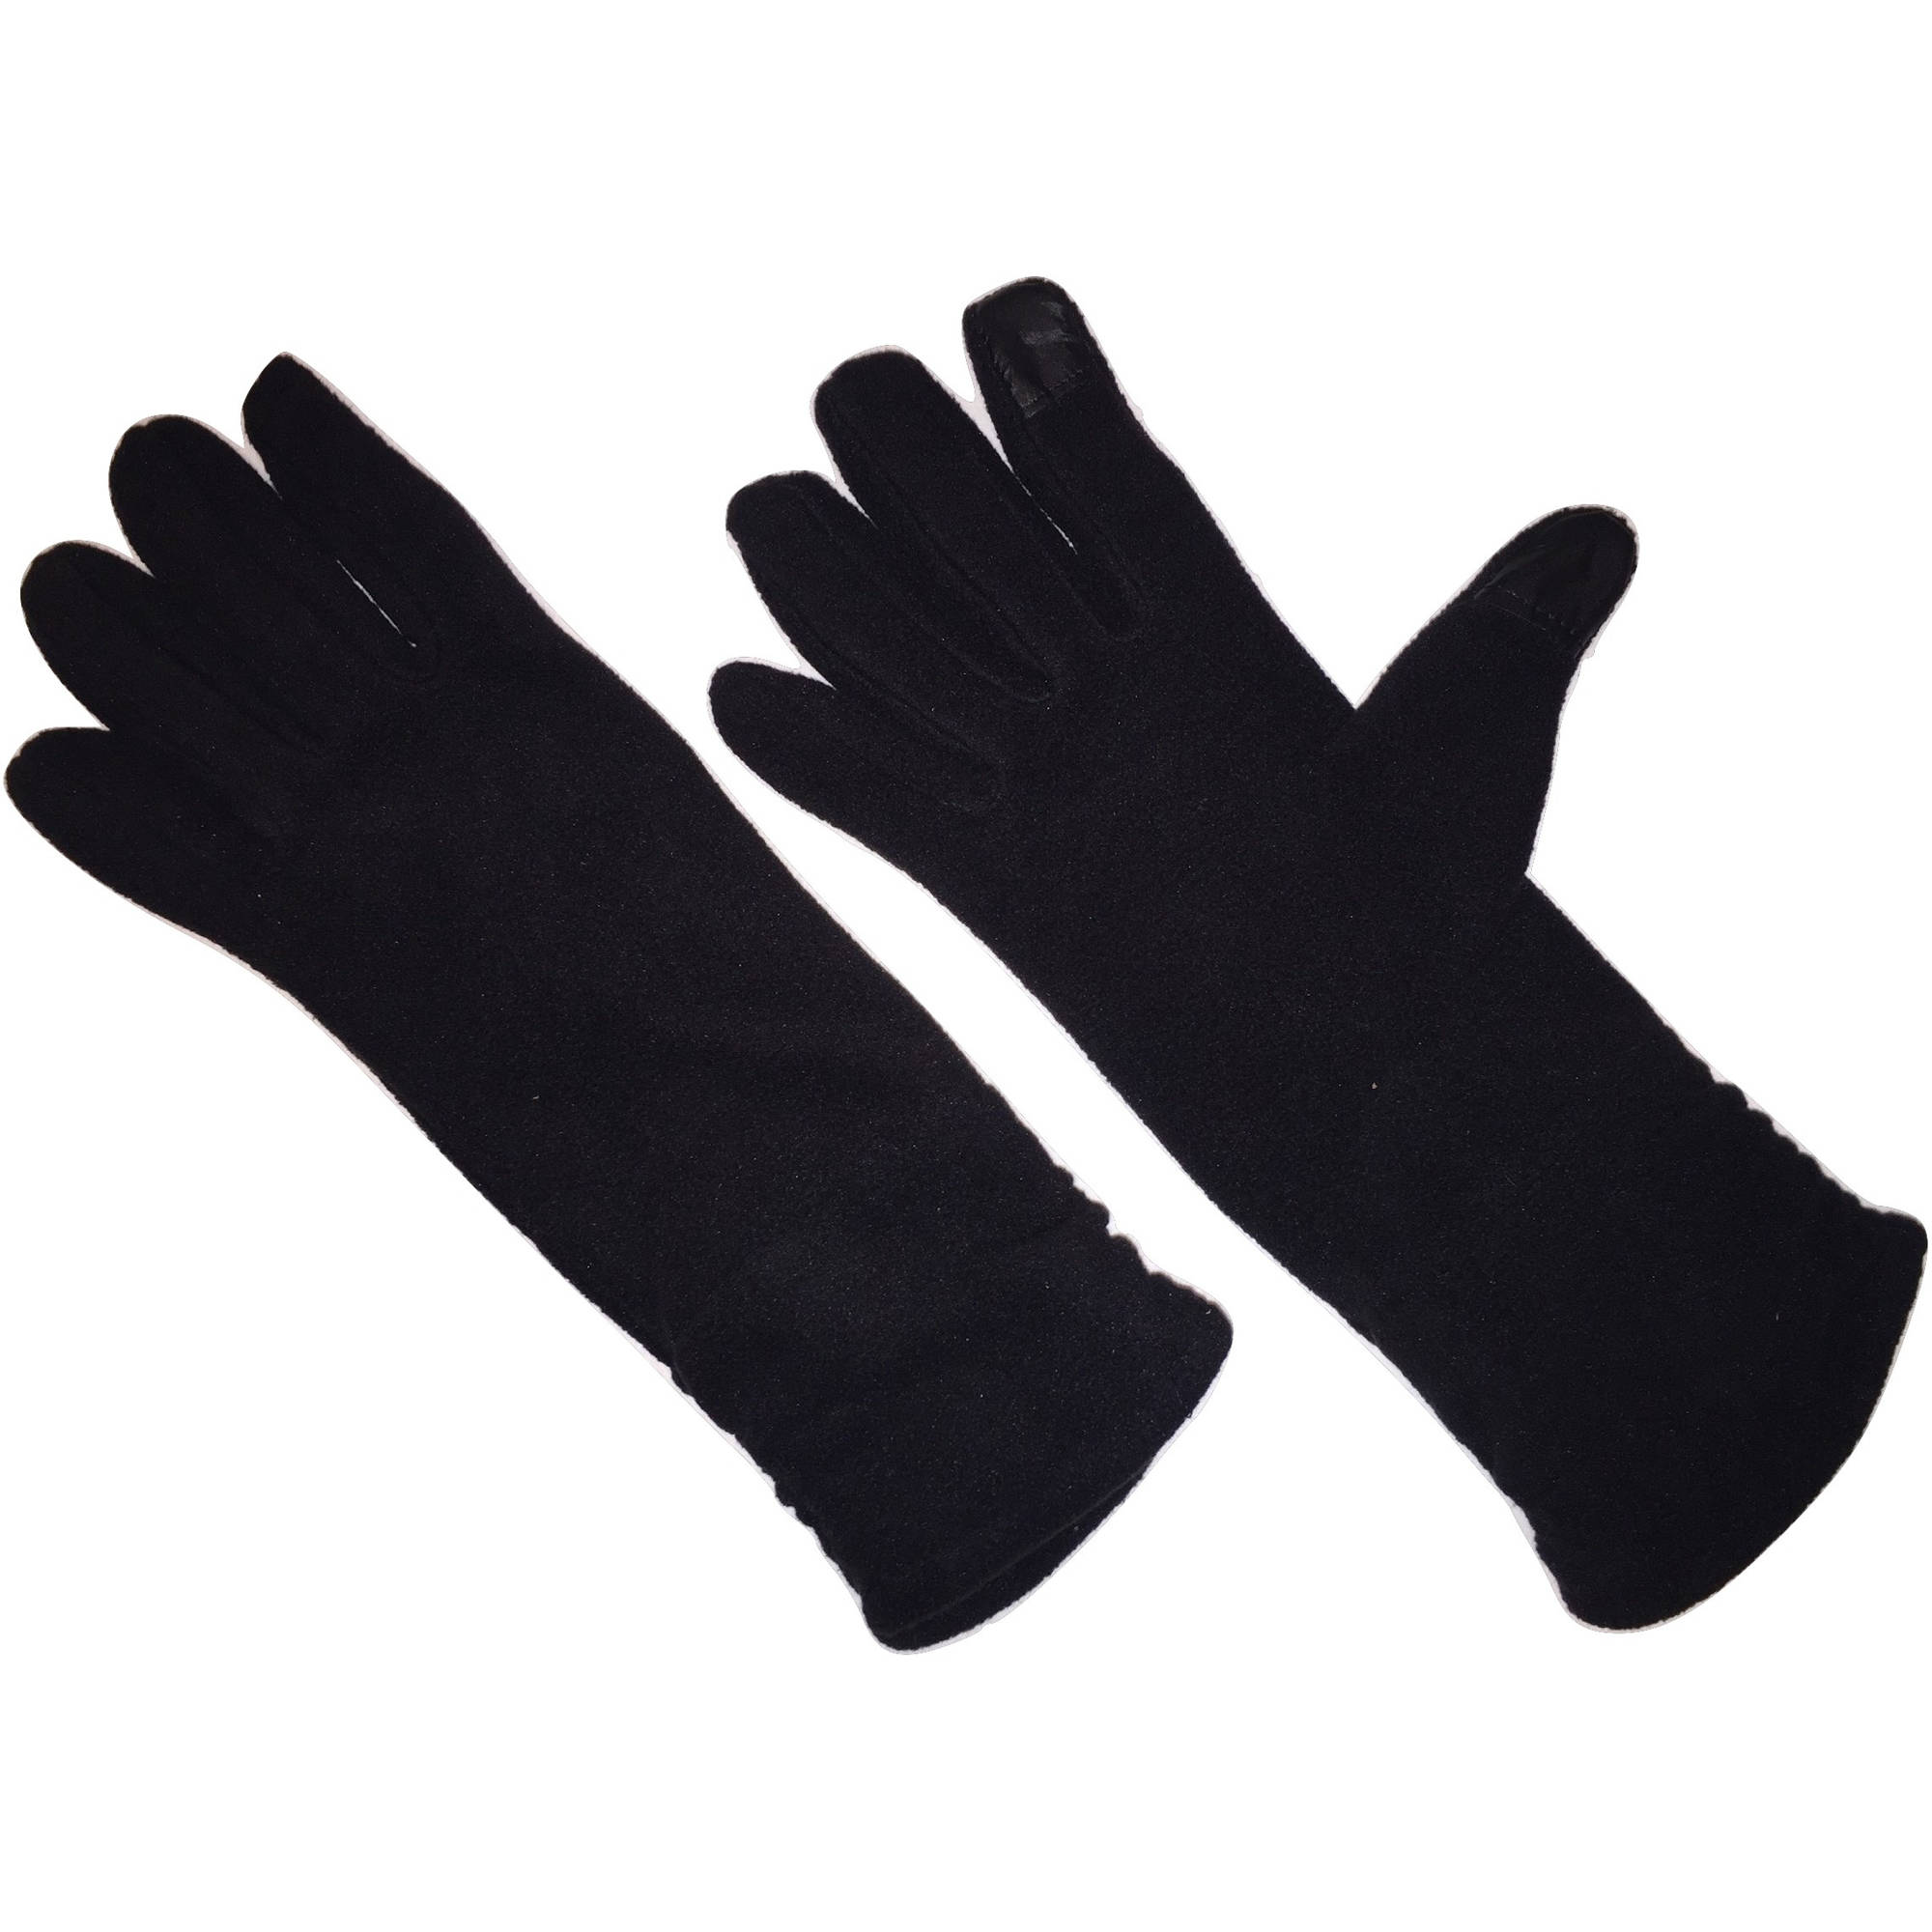 HANDS ON Ladies Touchscreen Fashion Fleece Glove - image 1 of 1